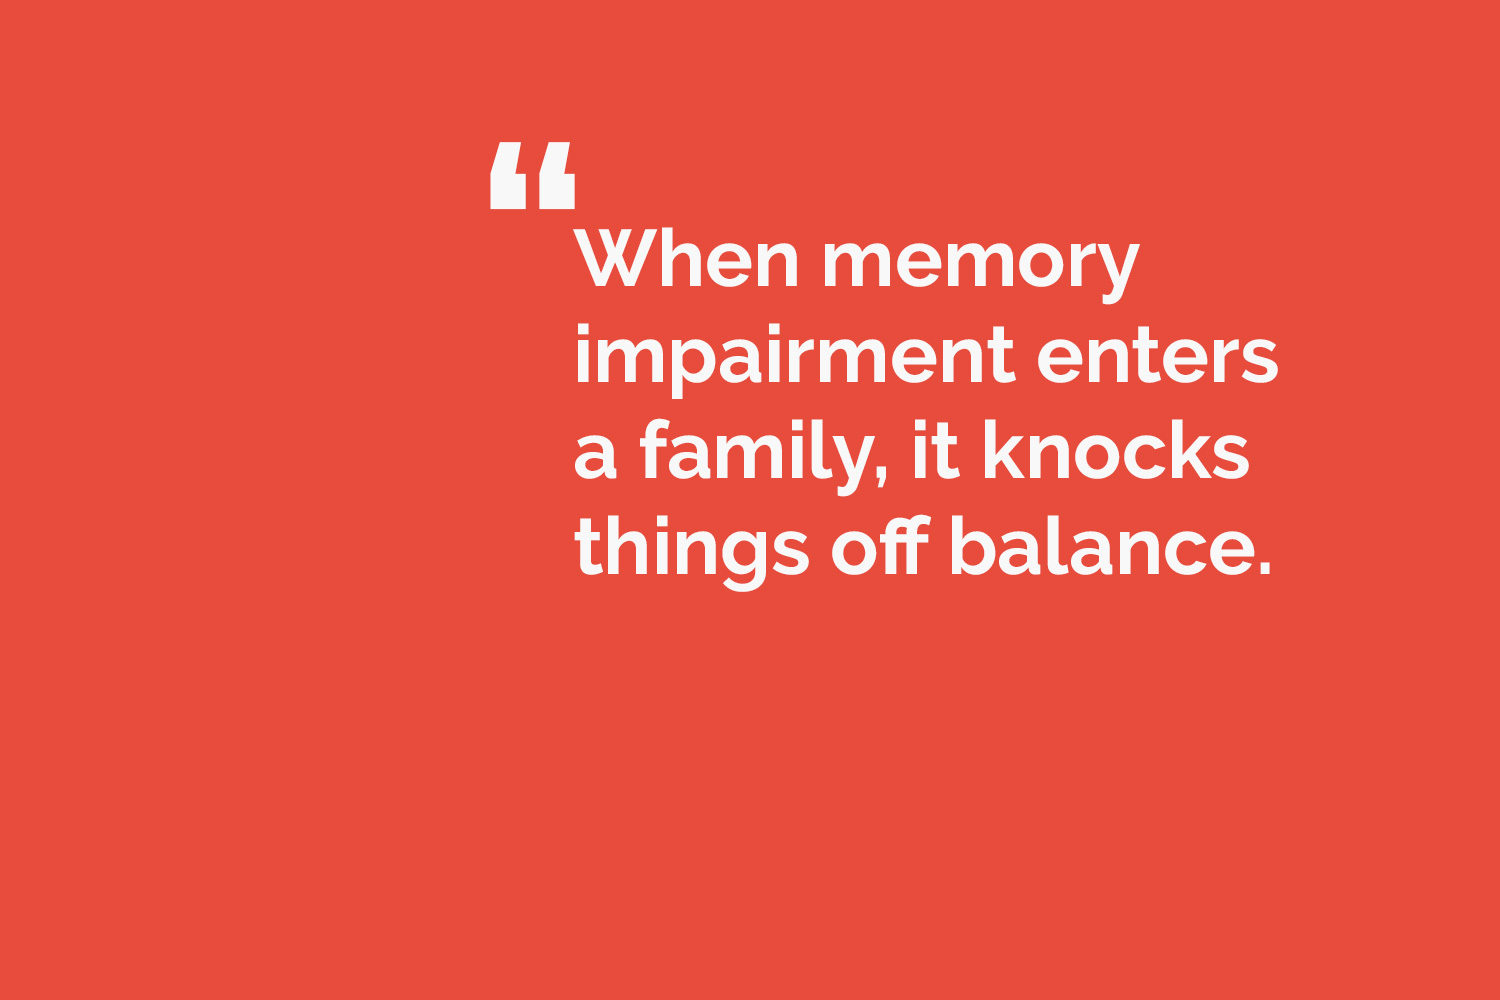 quote card reads: When memory impairment enters a family, it knocks things off balance.